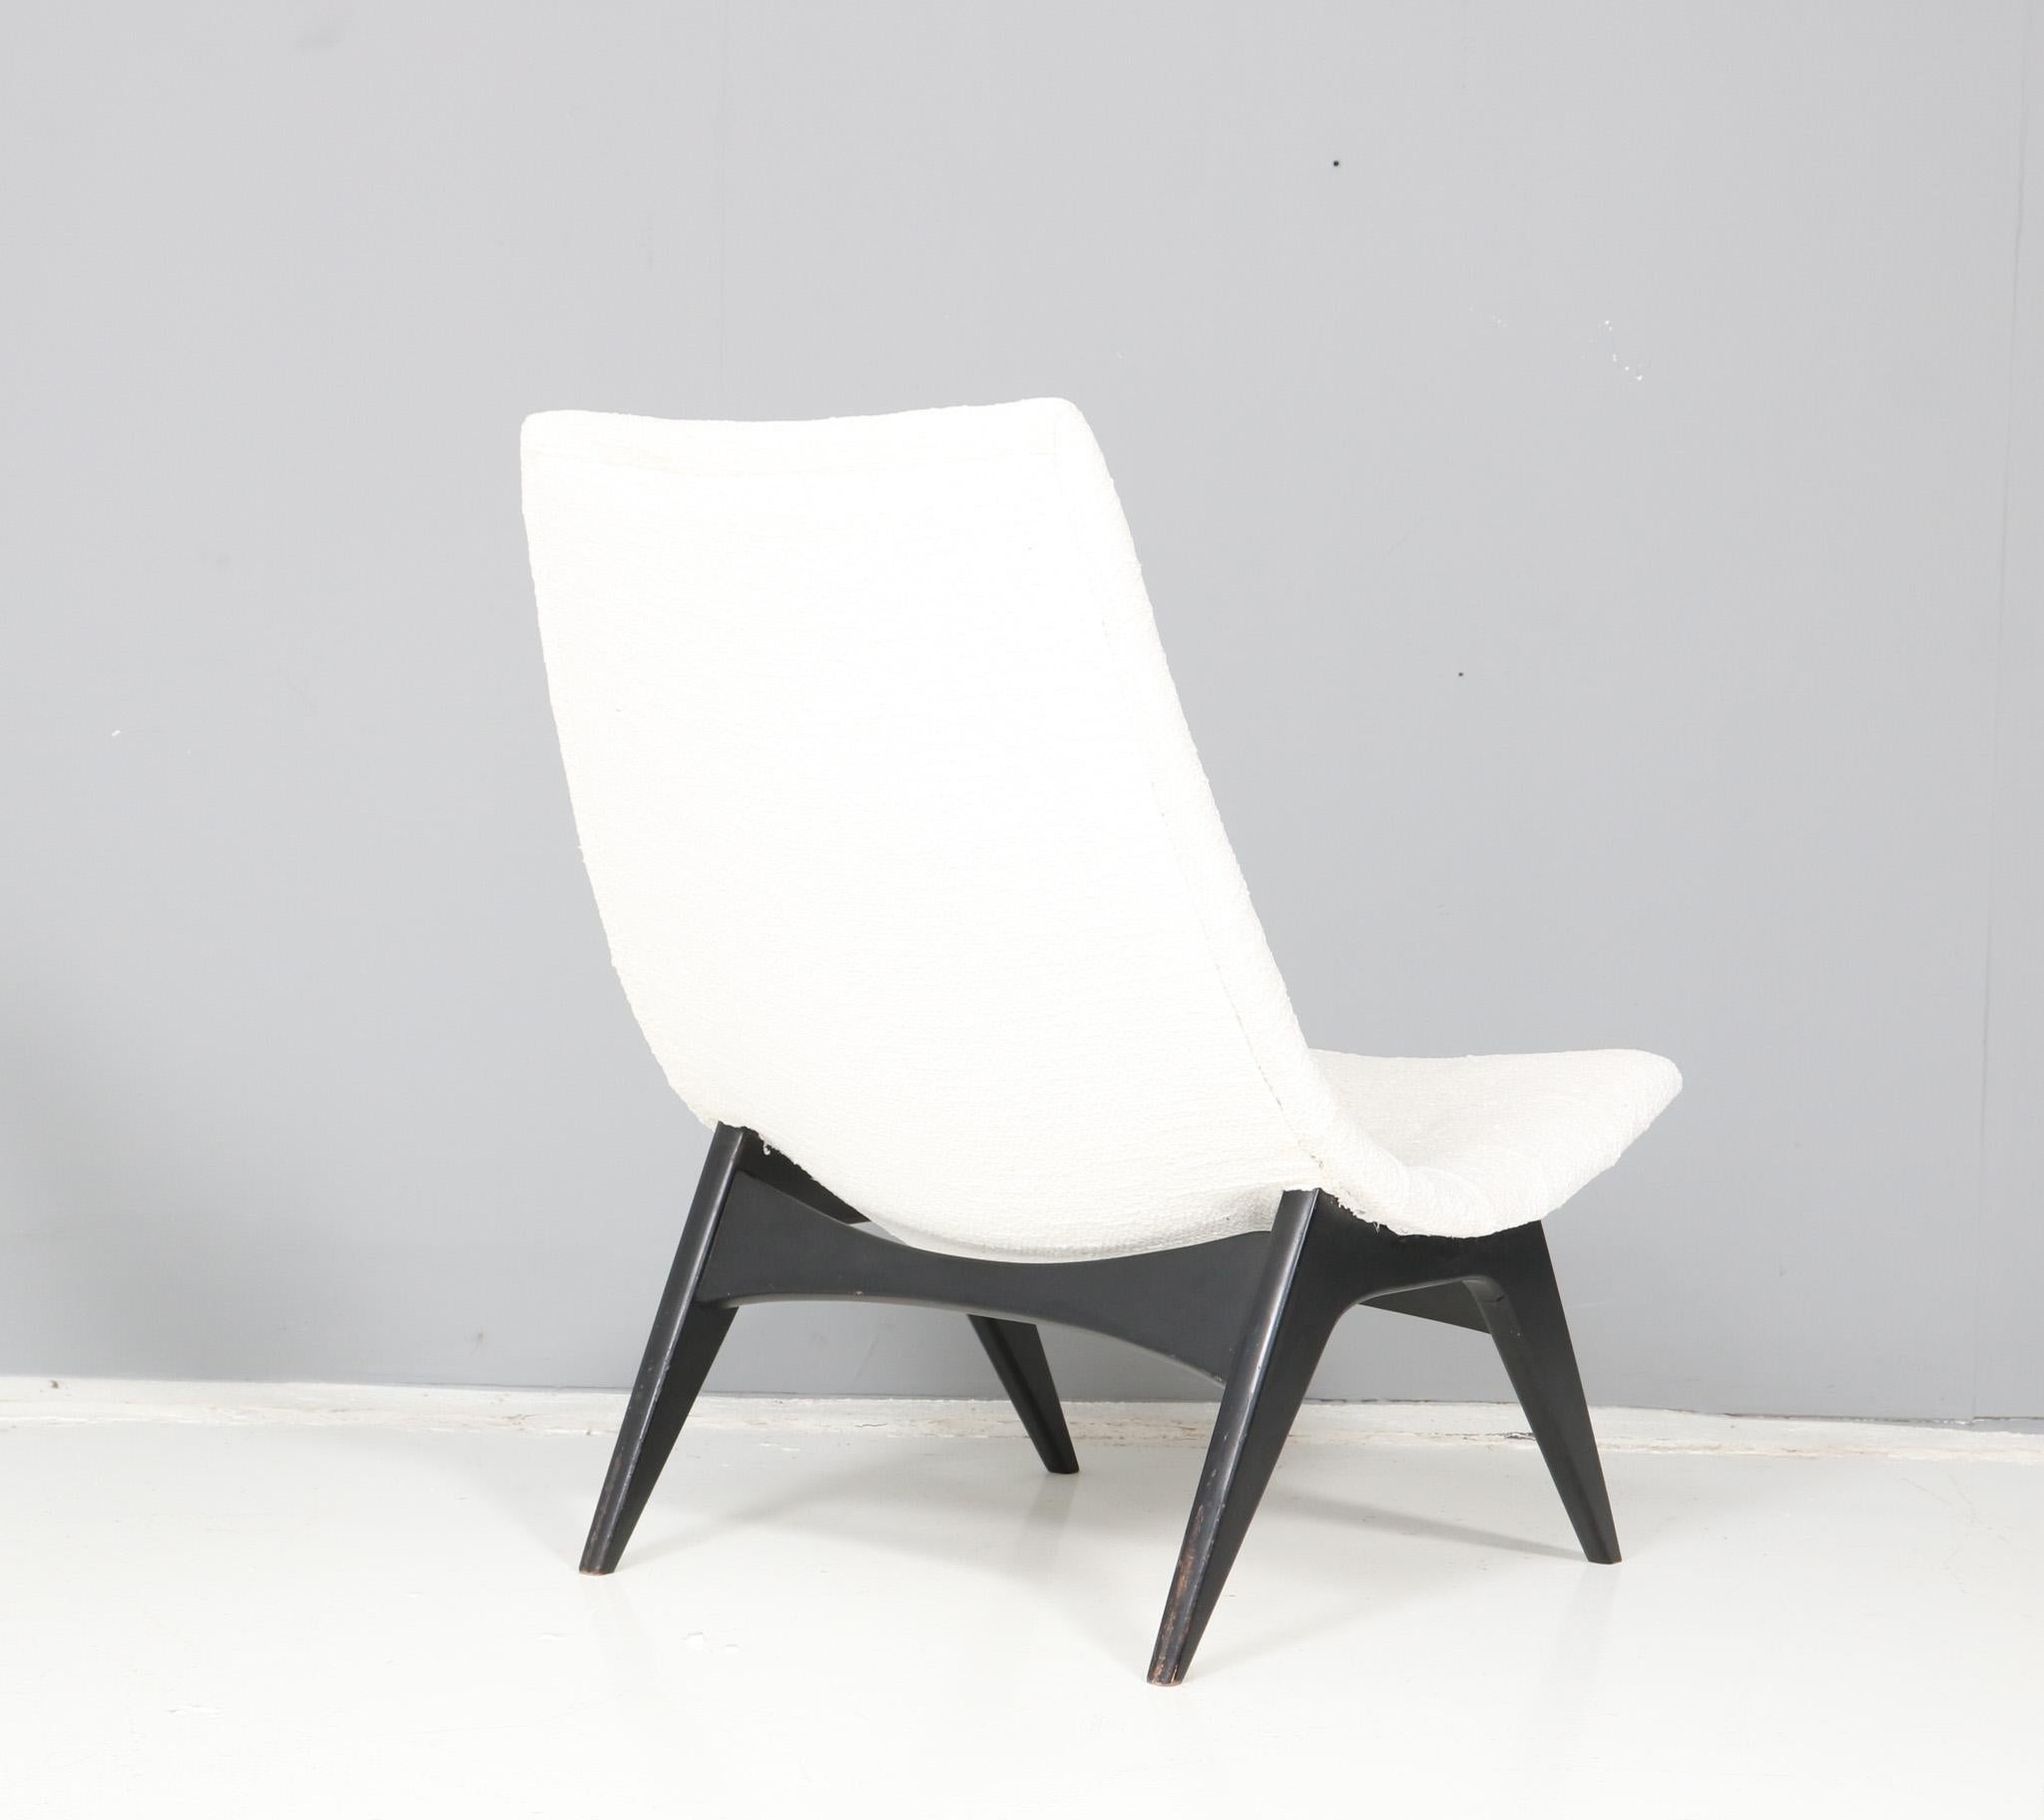 Mid-20th Century Mid-Century Modern Fatölj Nr. 755 Lounge Chair by Svante Skogh for Olof Persons For Sale